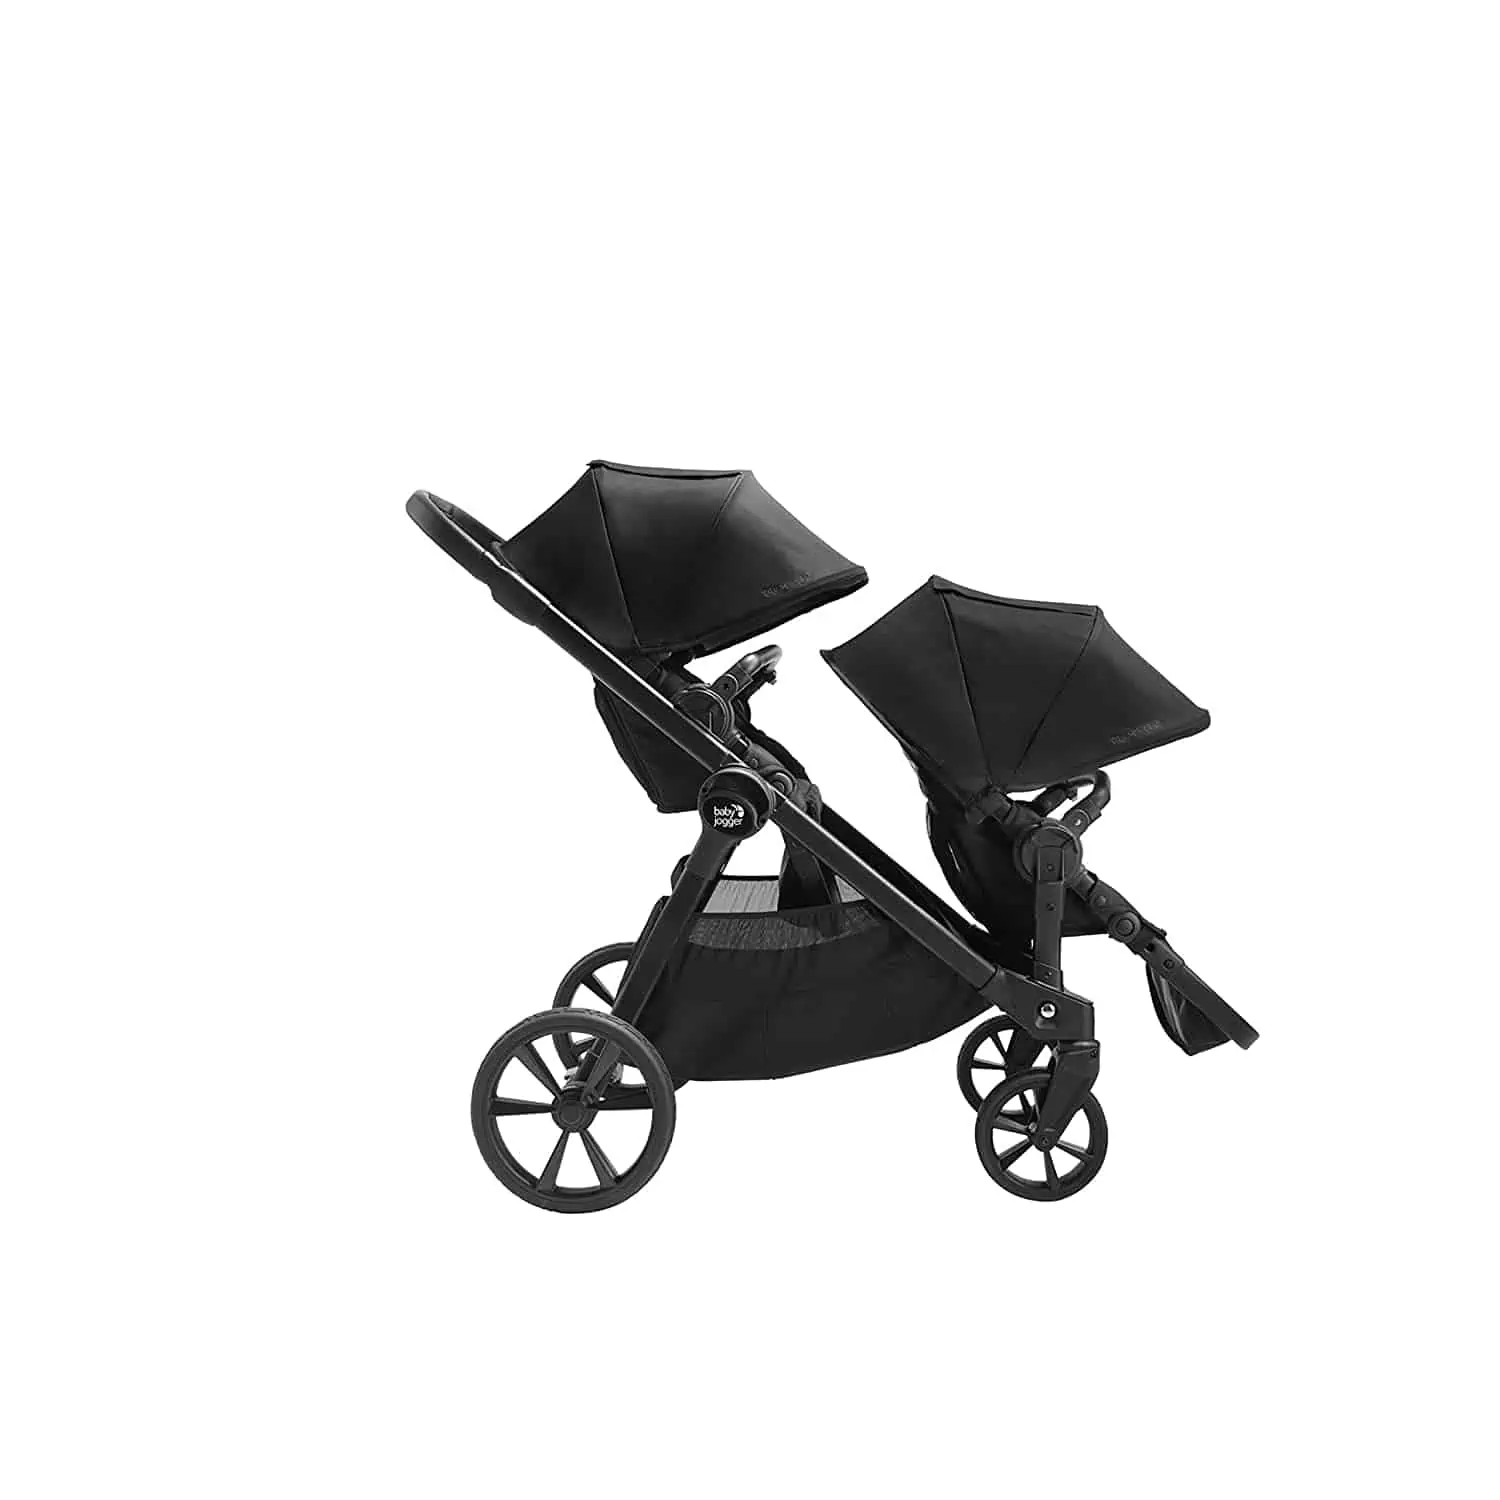 Photo of the Baby Jogger City Select 2 Stroller